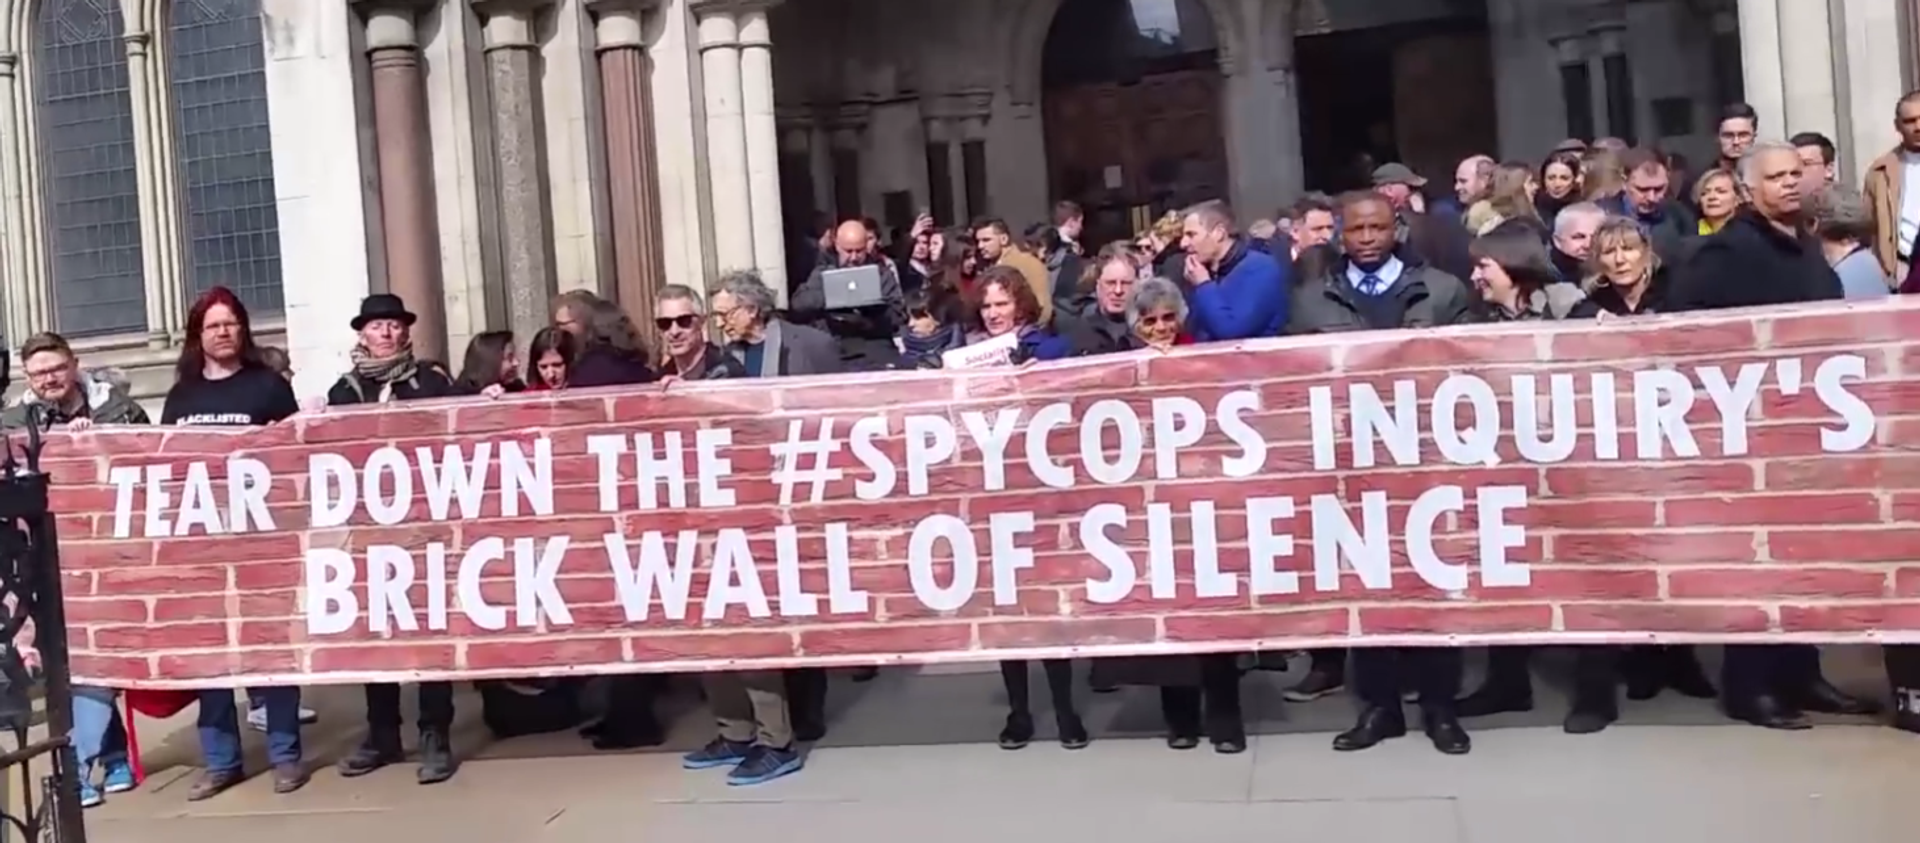 Victims of spycops outside UK's Royal Courts of Justice in Aldwych. - Sputnik International, 1920, 27.11.2020